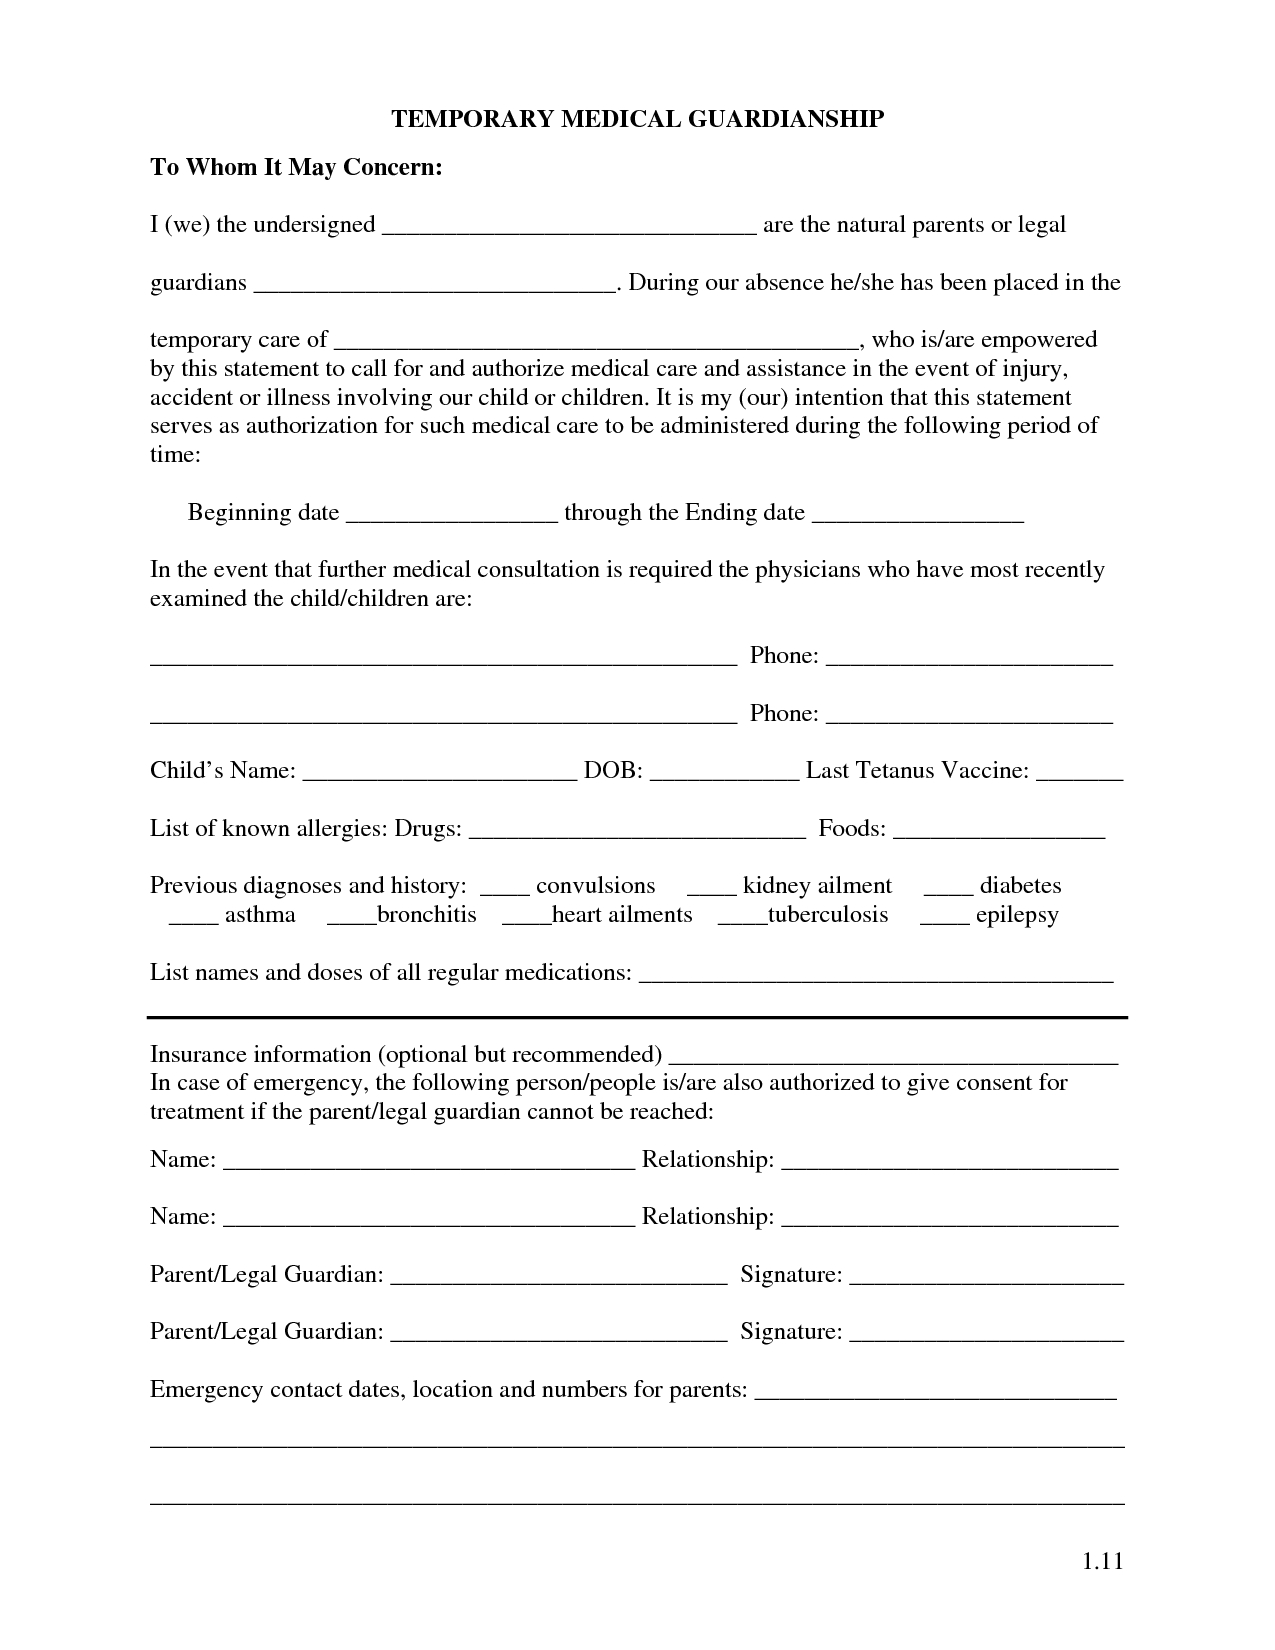 Free Printable Temporary Guardianship Forms | Forms | Child Custody - Free Printable Child Guardianship Forms